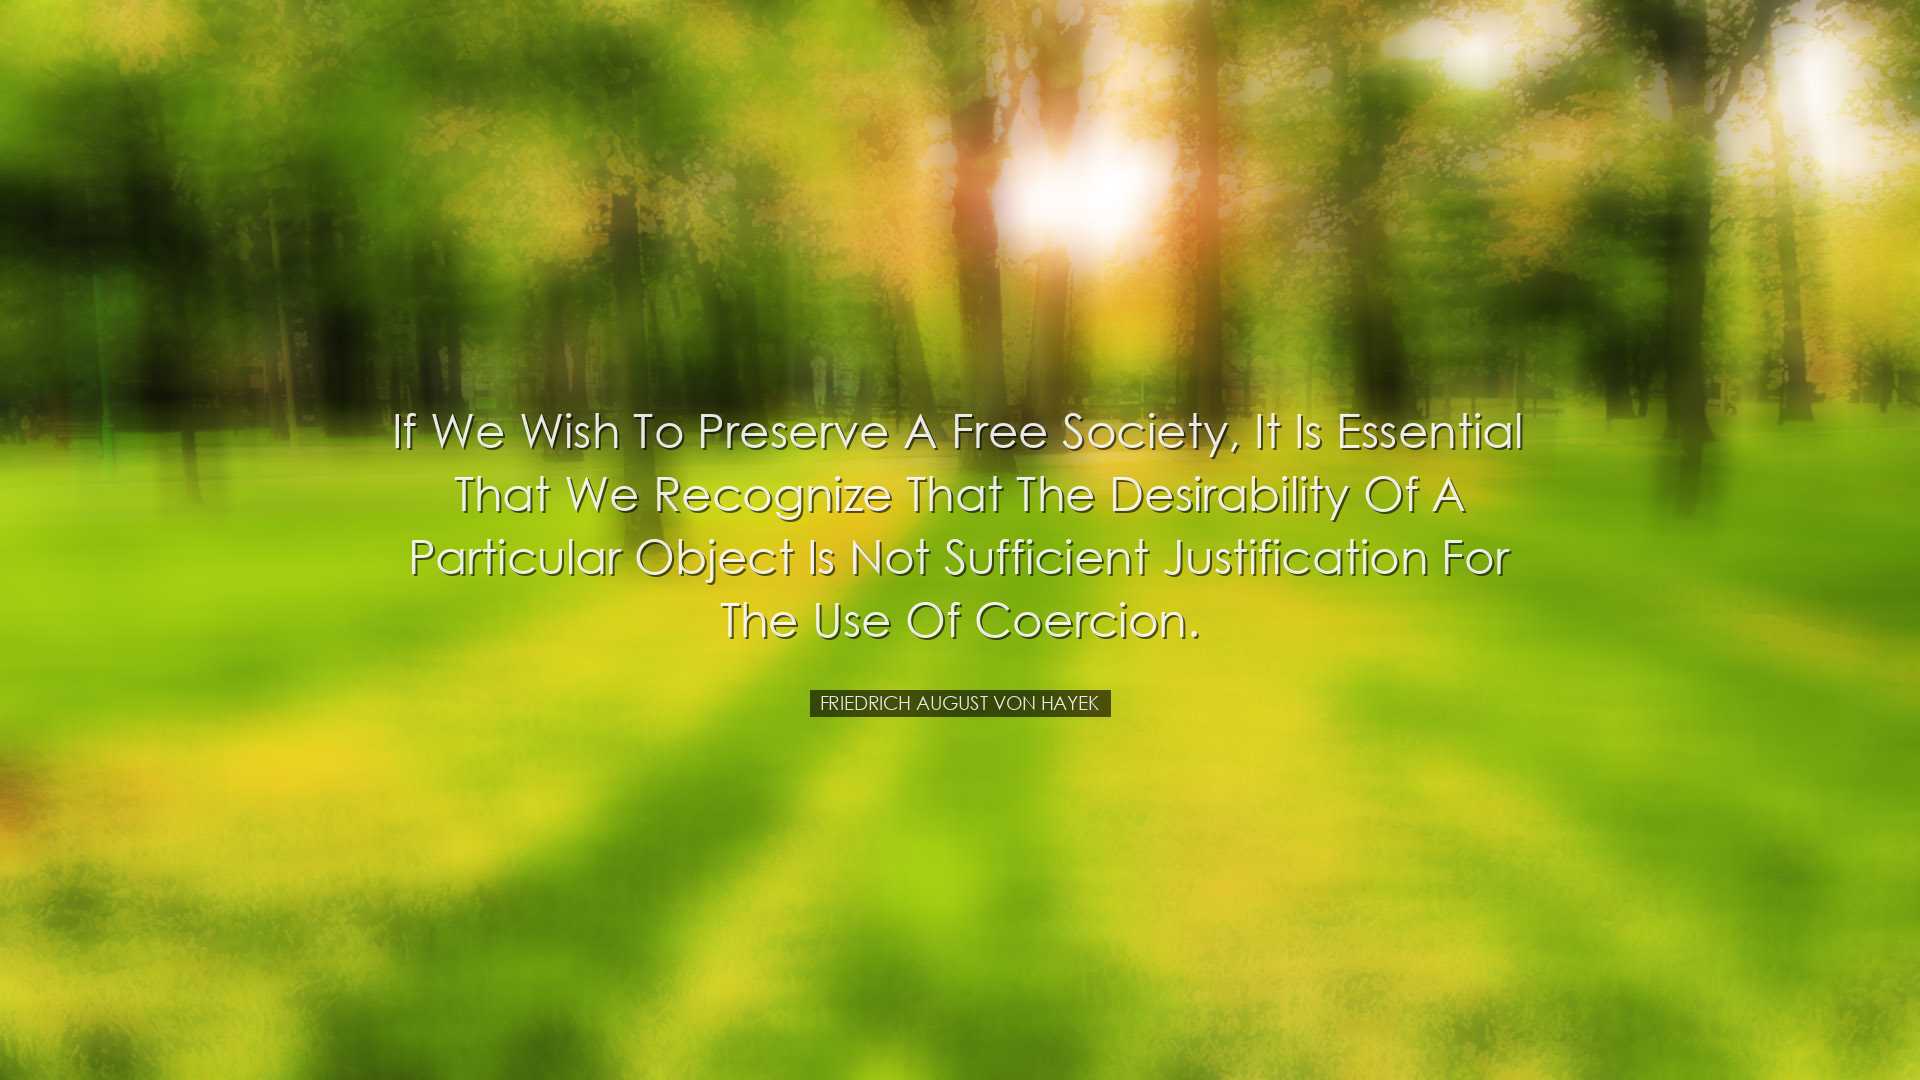 If we wish to preserve a free society, it is essential that we rec